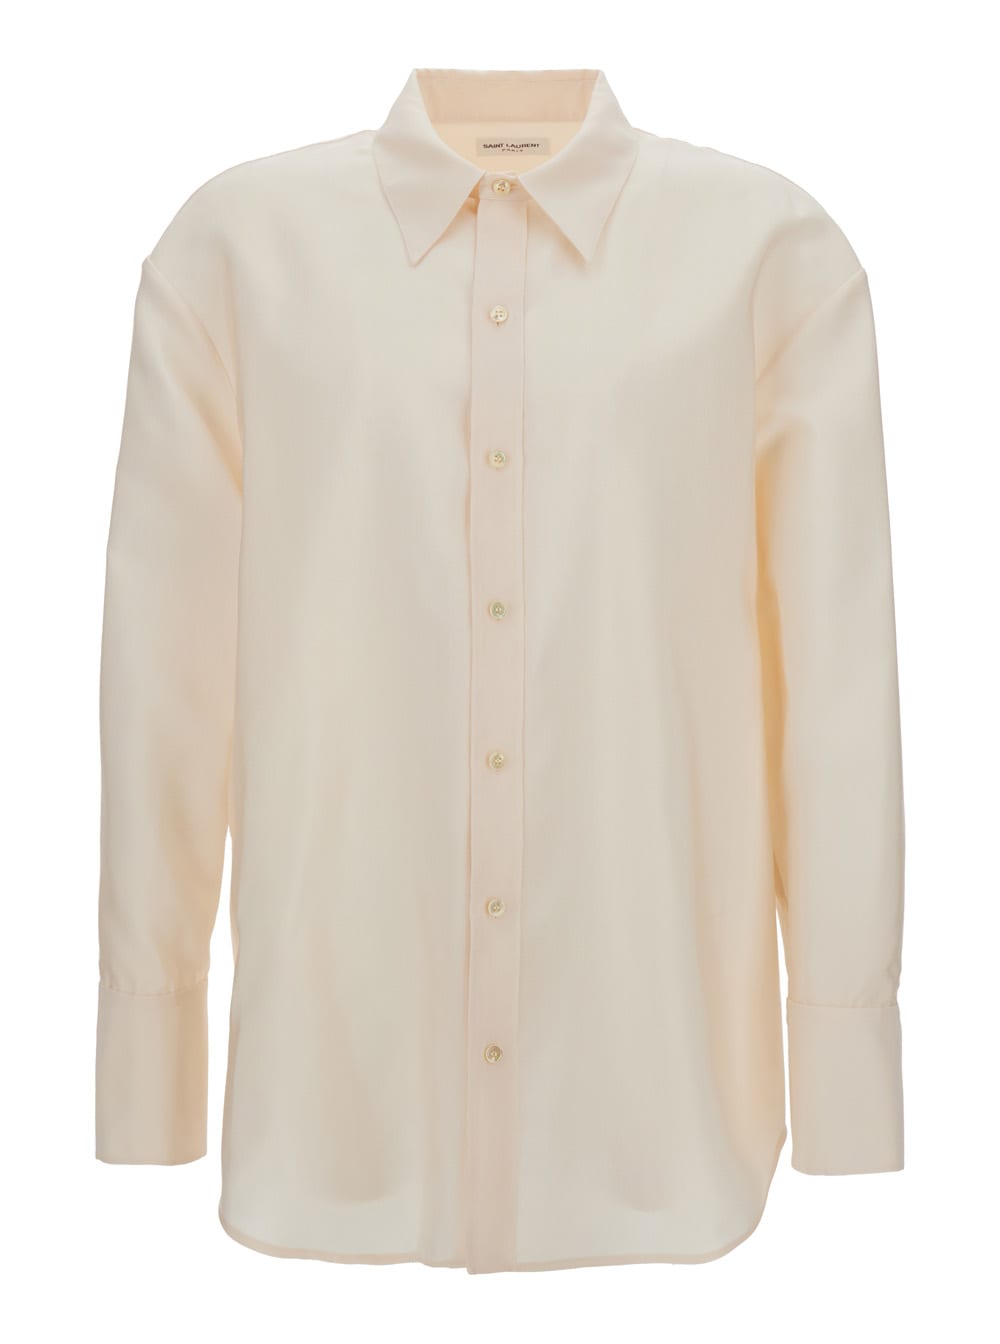 SAINT LAURENT IVORY WHITE BUTTONED OVERSIZED SHIRT IN TECHNICAL FABRIC MAN